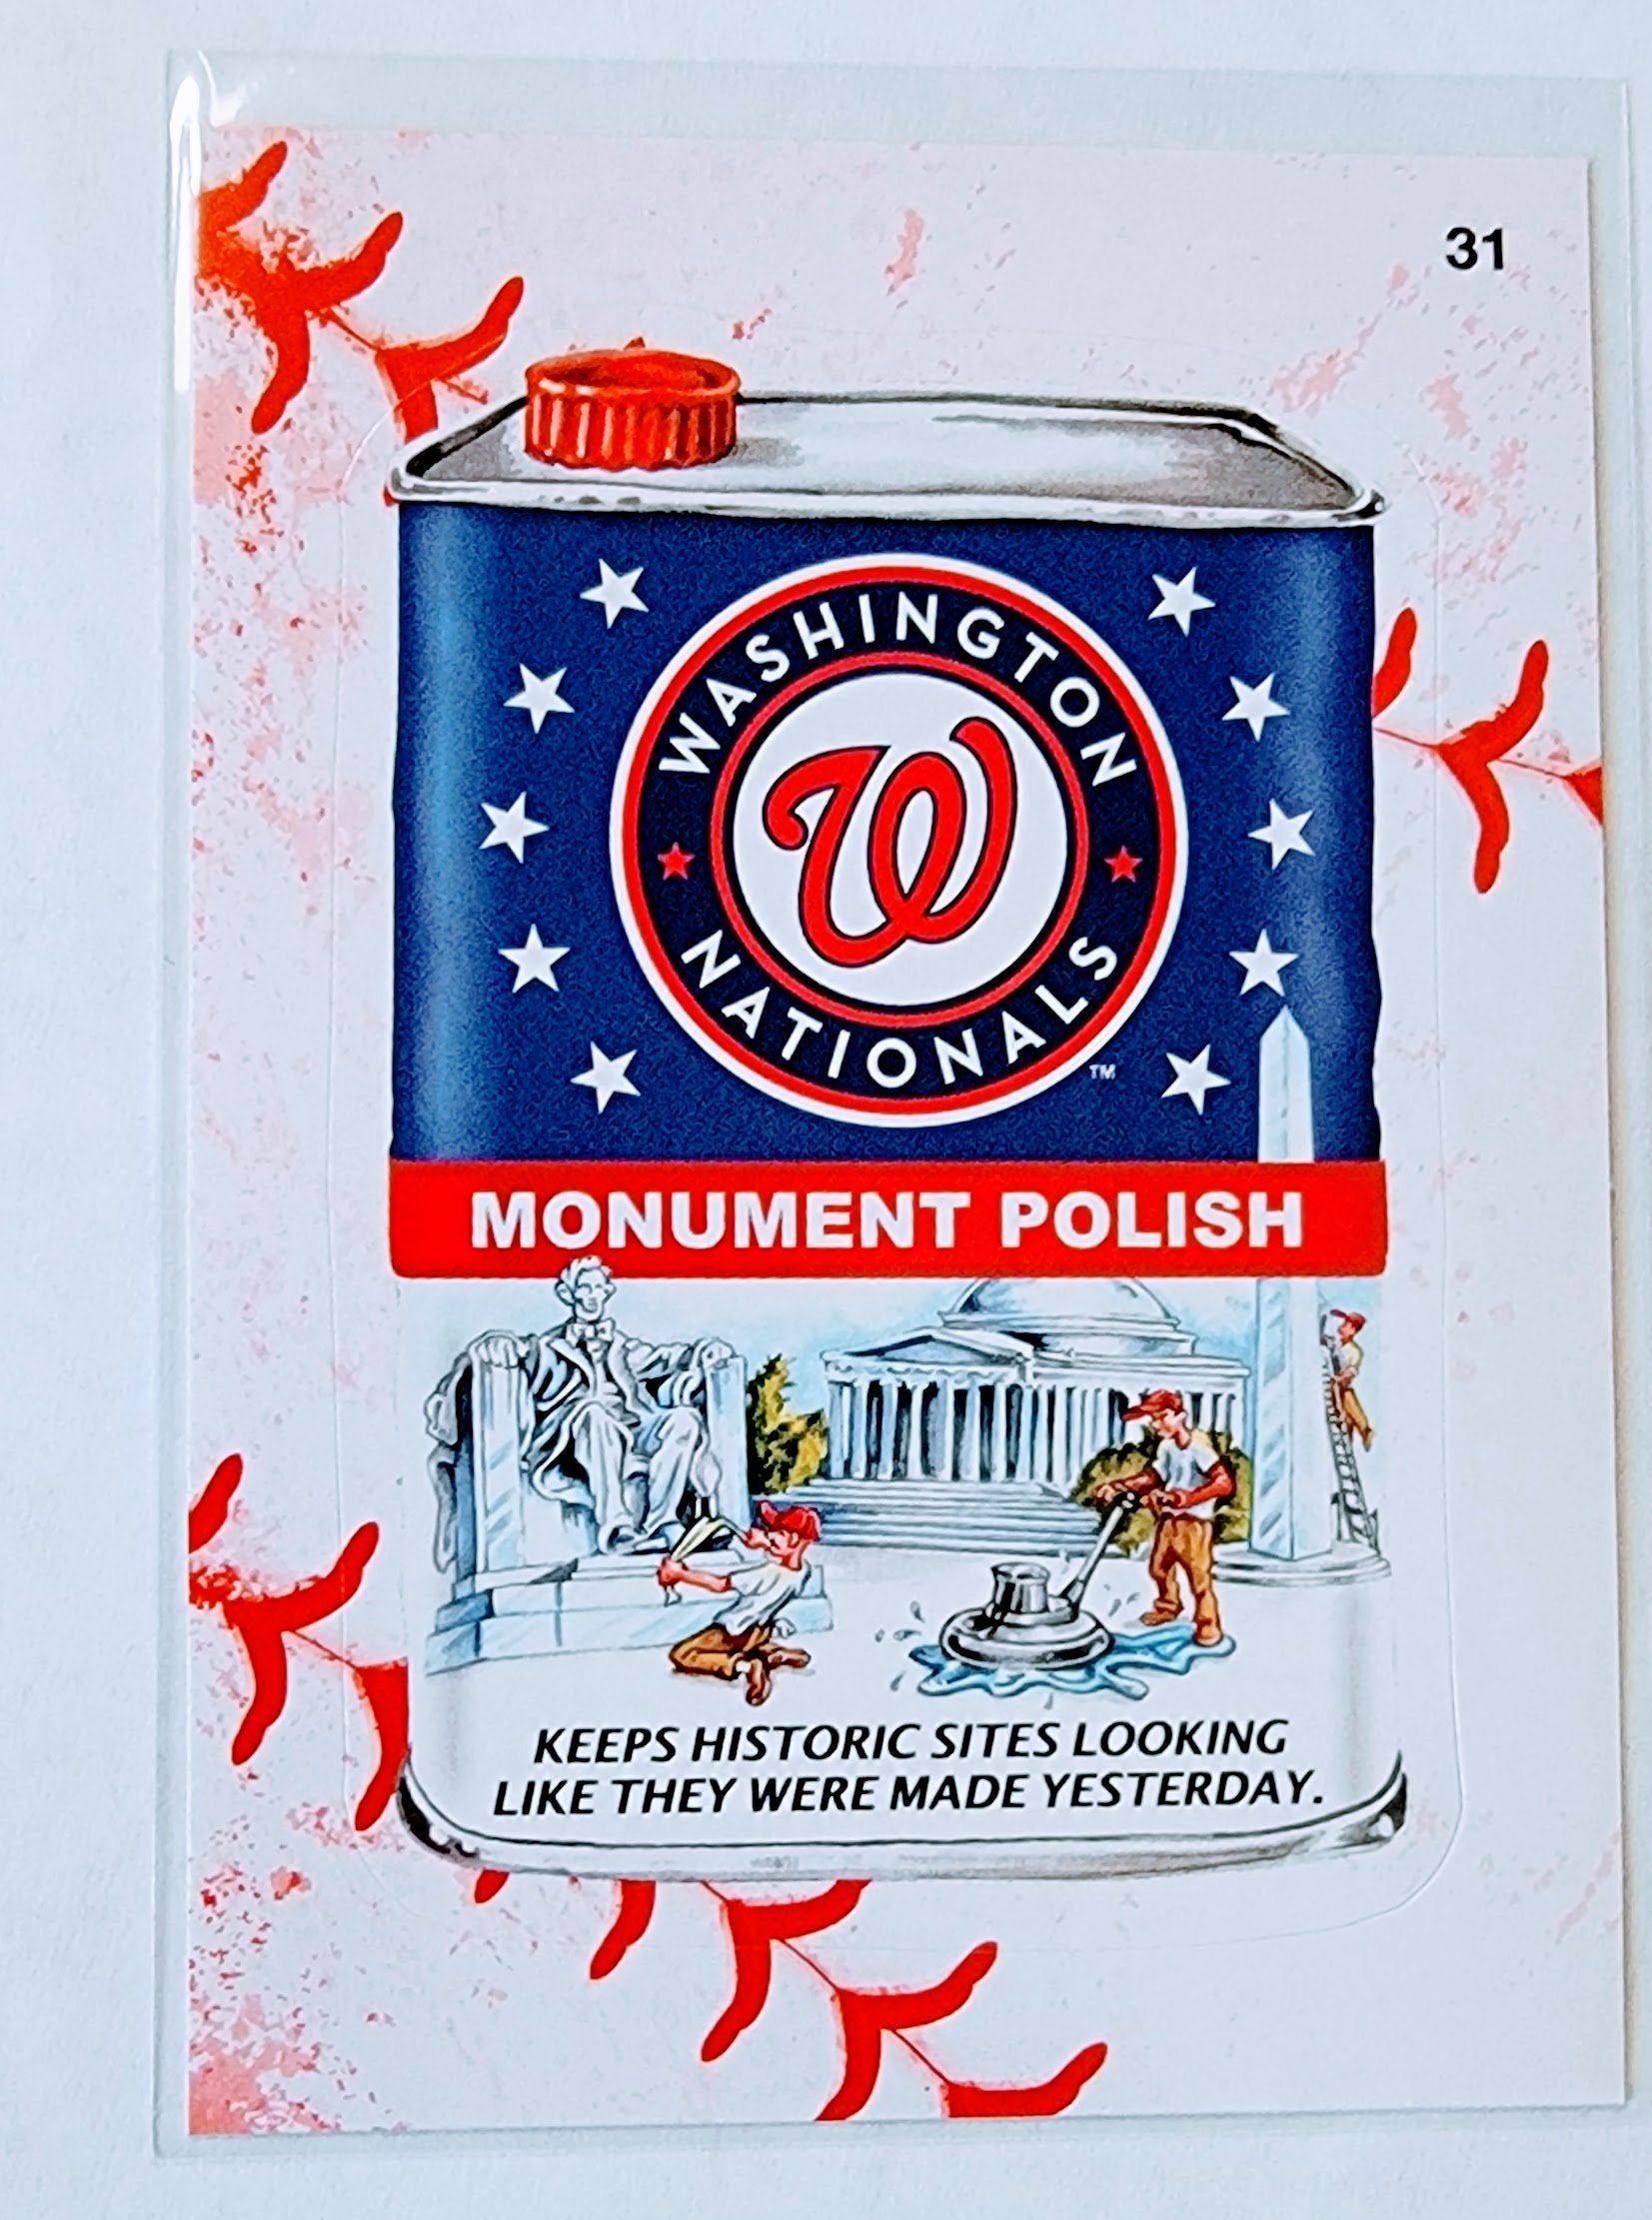 2016 Topps MLB Baseball Wacky Packages Monument Polish Washington Nationals Lace Parallel Sticker Trading Card MCSC1 simple Xclusive Collectibles   